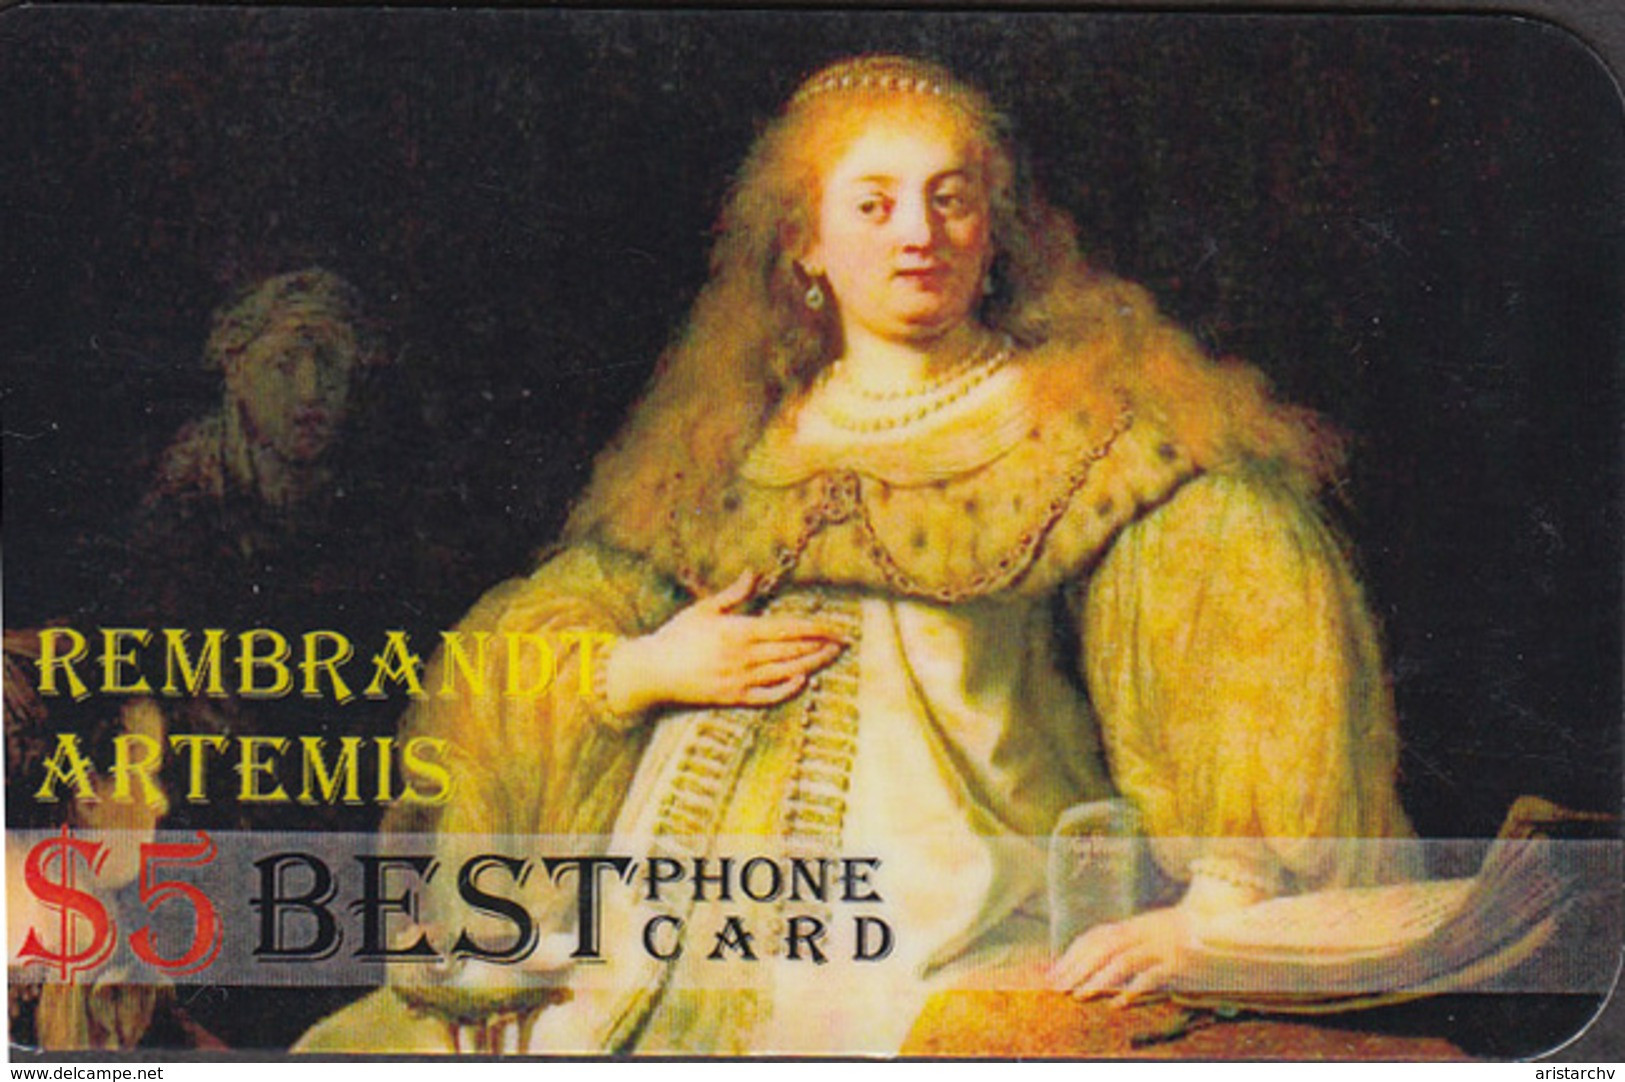 ART REMBRANDT SET OF 4 PHONE CARDS - Malerei